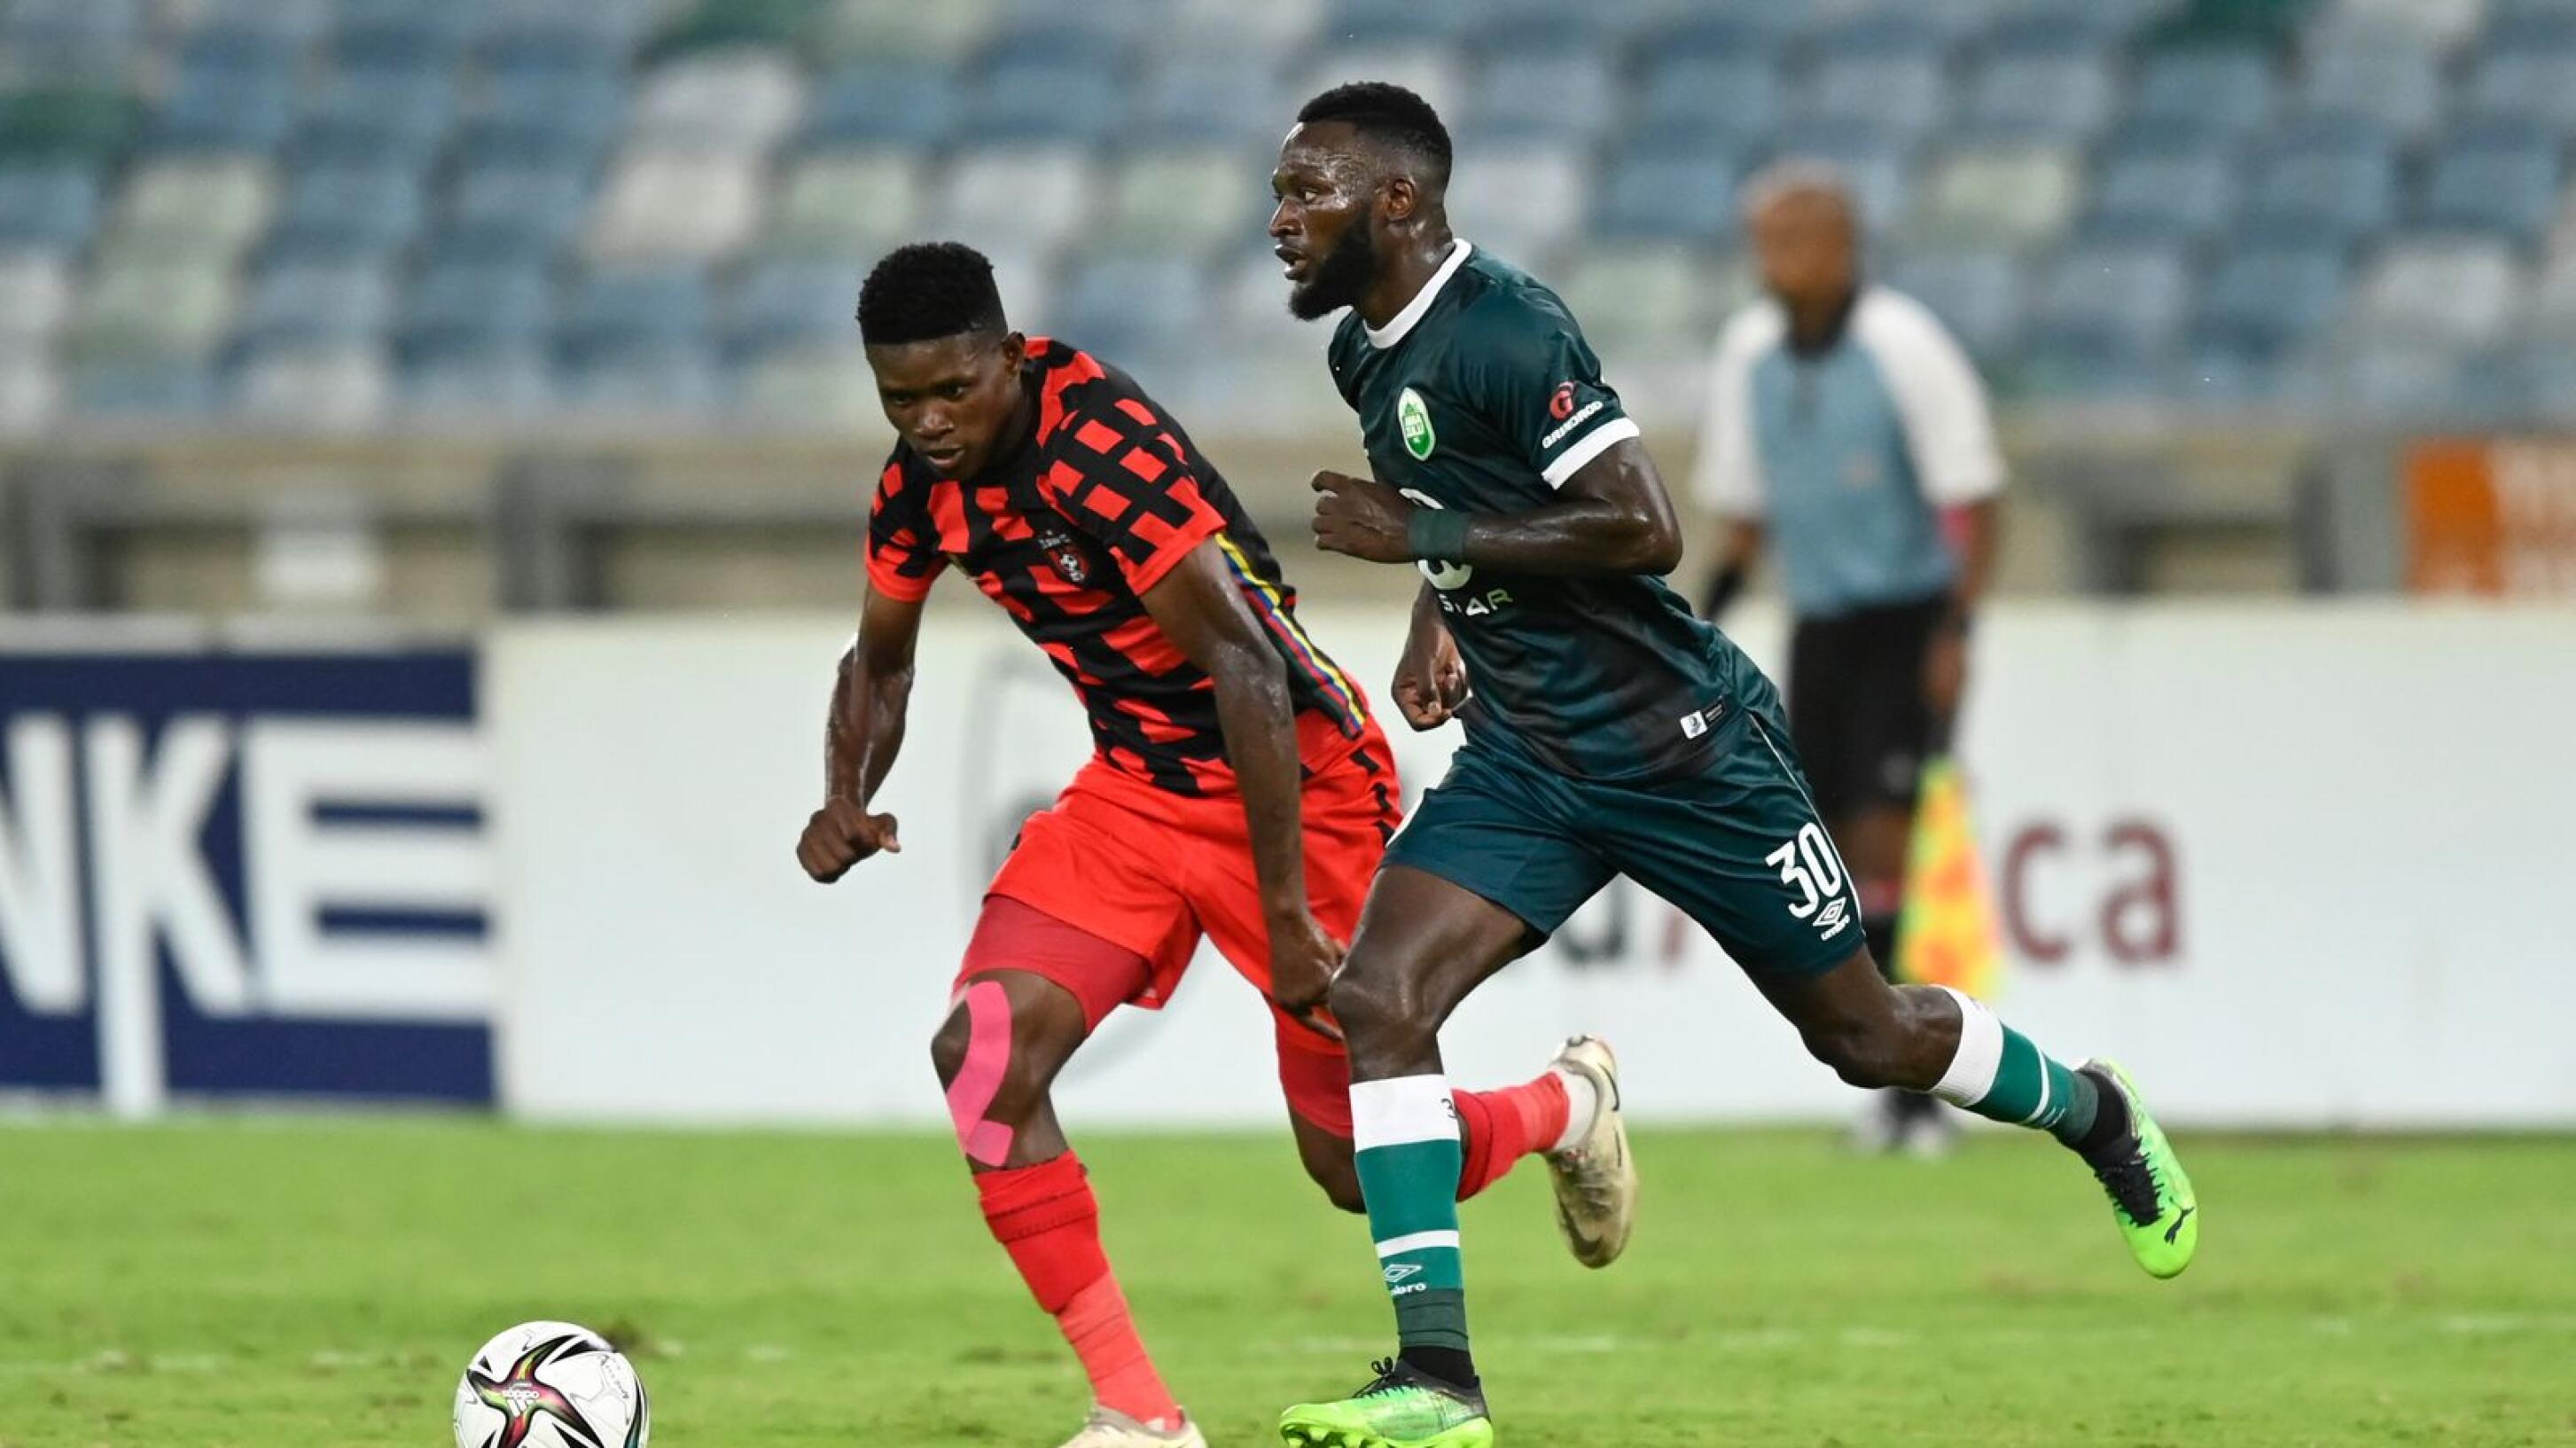 Bathusi Aubaas of TS Galaxy competes with Augustine Mulenga of AmaZulu FC during their DStv Premiership match at Moses Mabhida Stadium in Durban on Tuesday